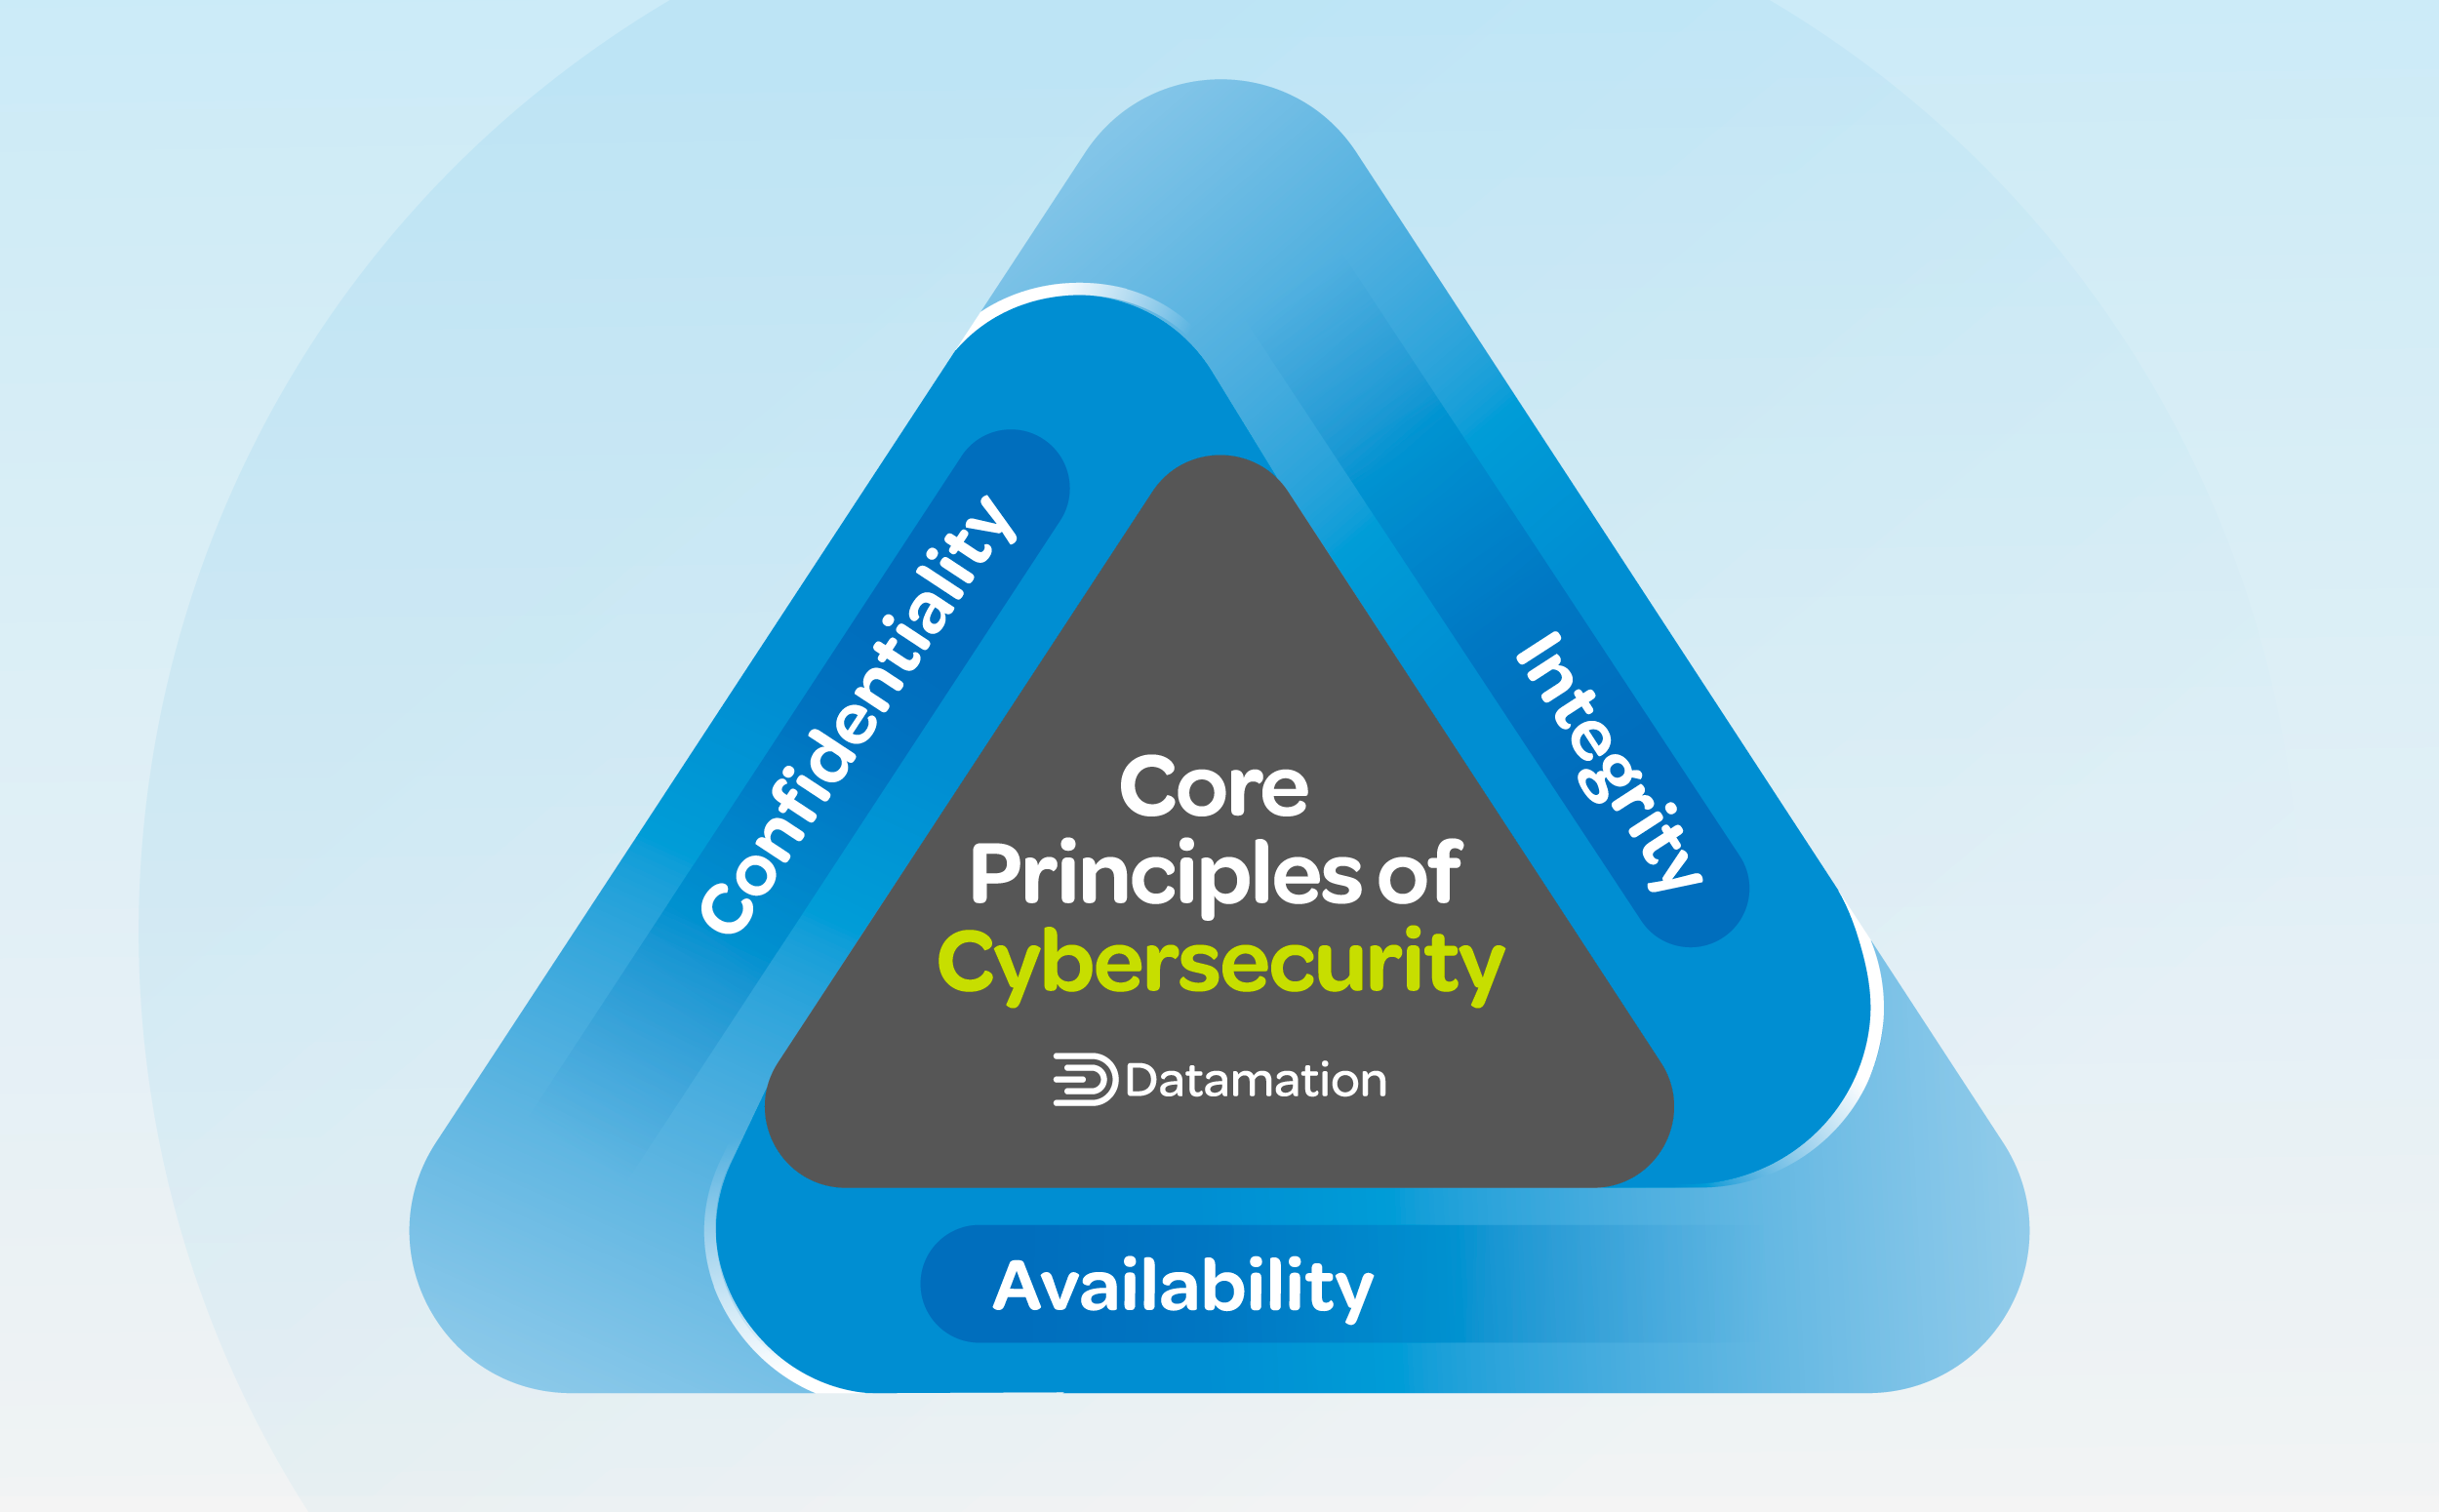 The Core Principles of Cybersecurity